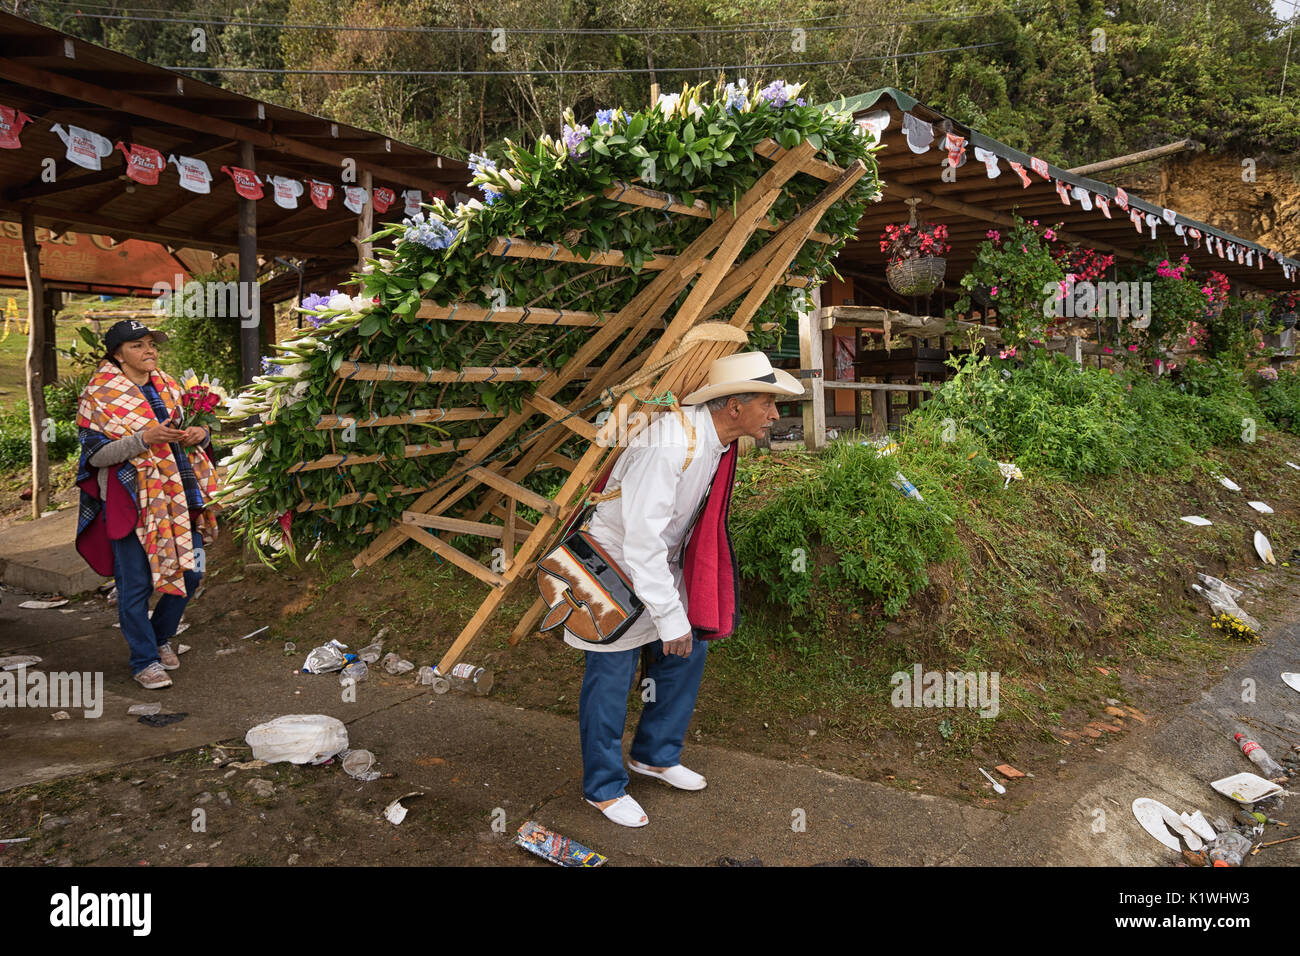 August 7, 2017 Medellin, Colombia: a farmer carries a large floral display on his back to the street to be transported to the flower festival parade Stock Photo